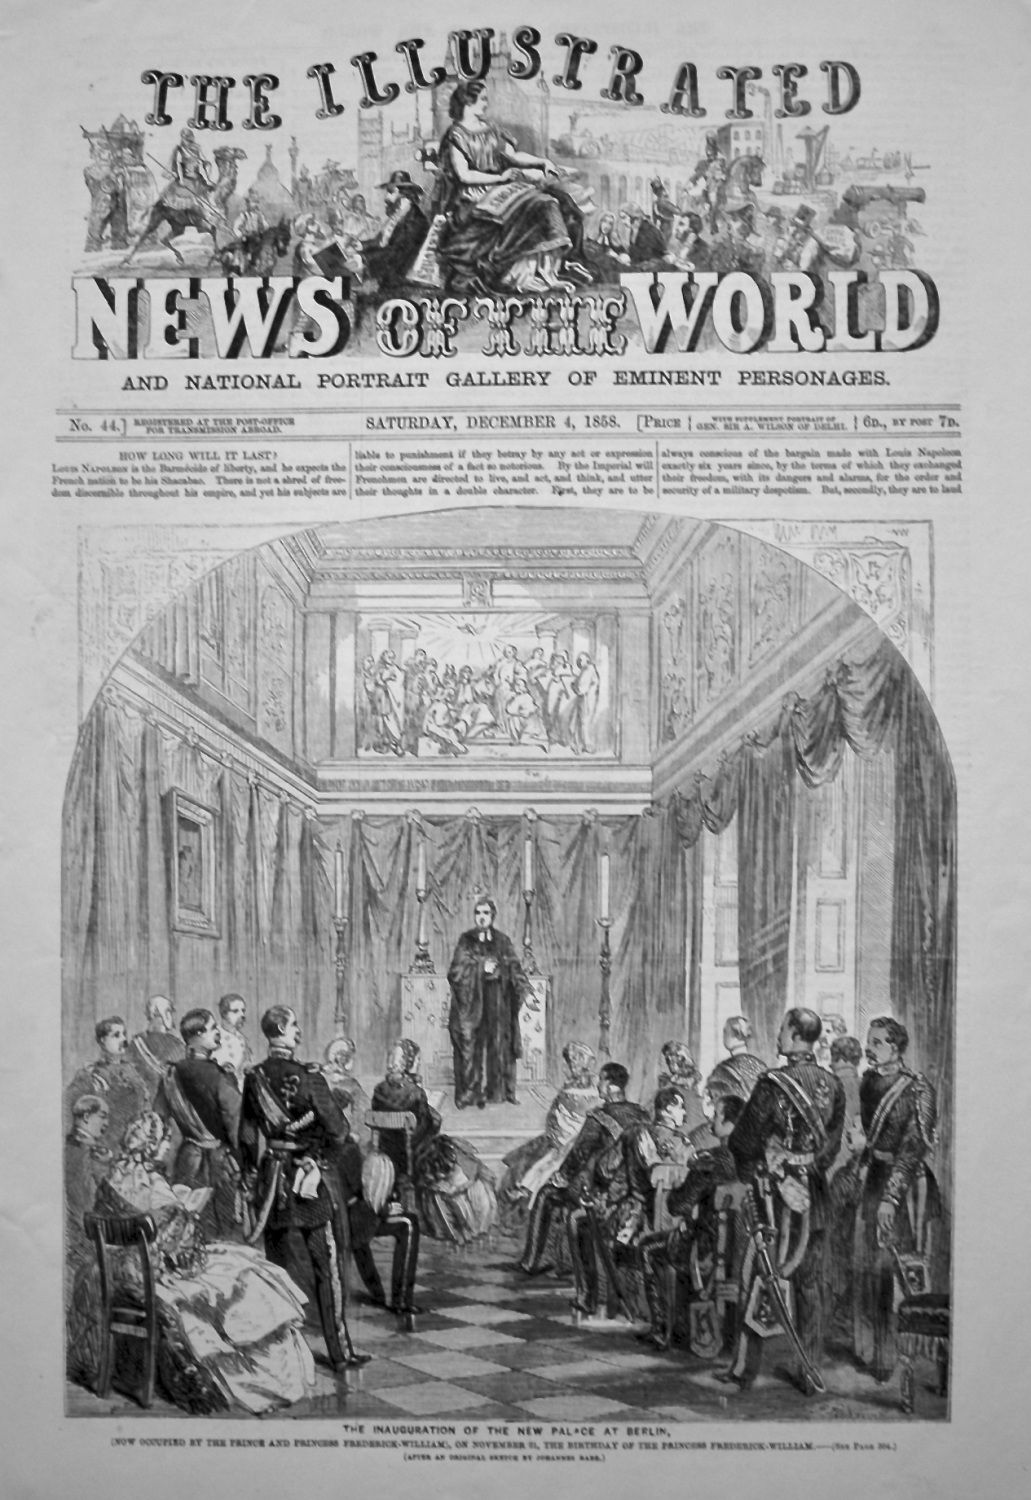 The Illustrated News of the World, December 4th, 1858.